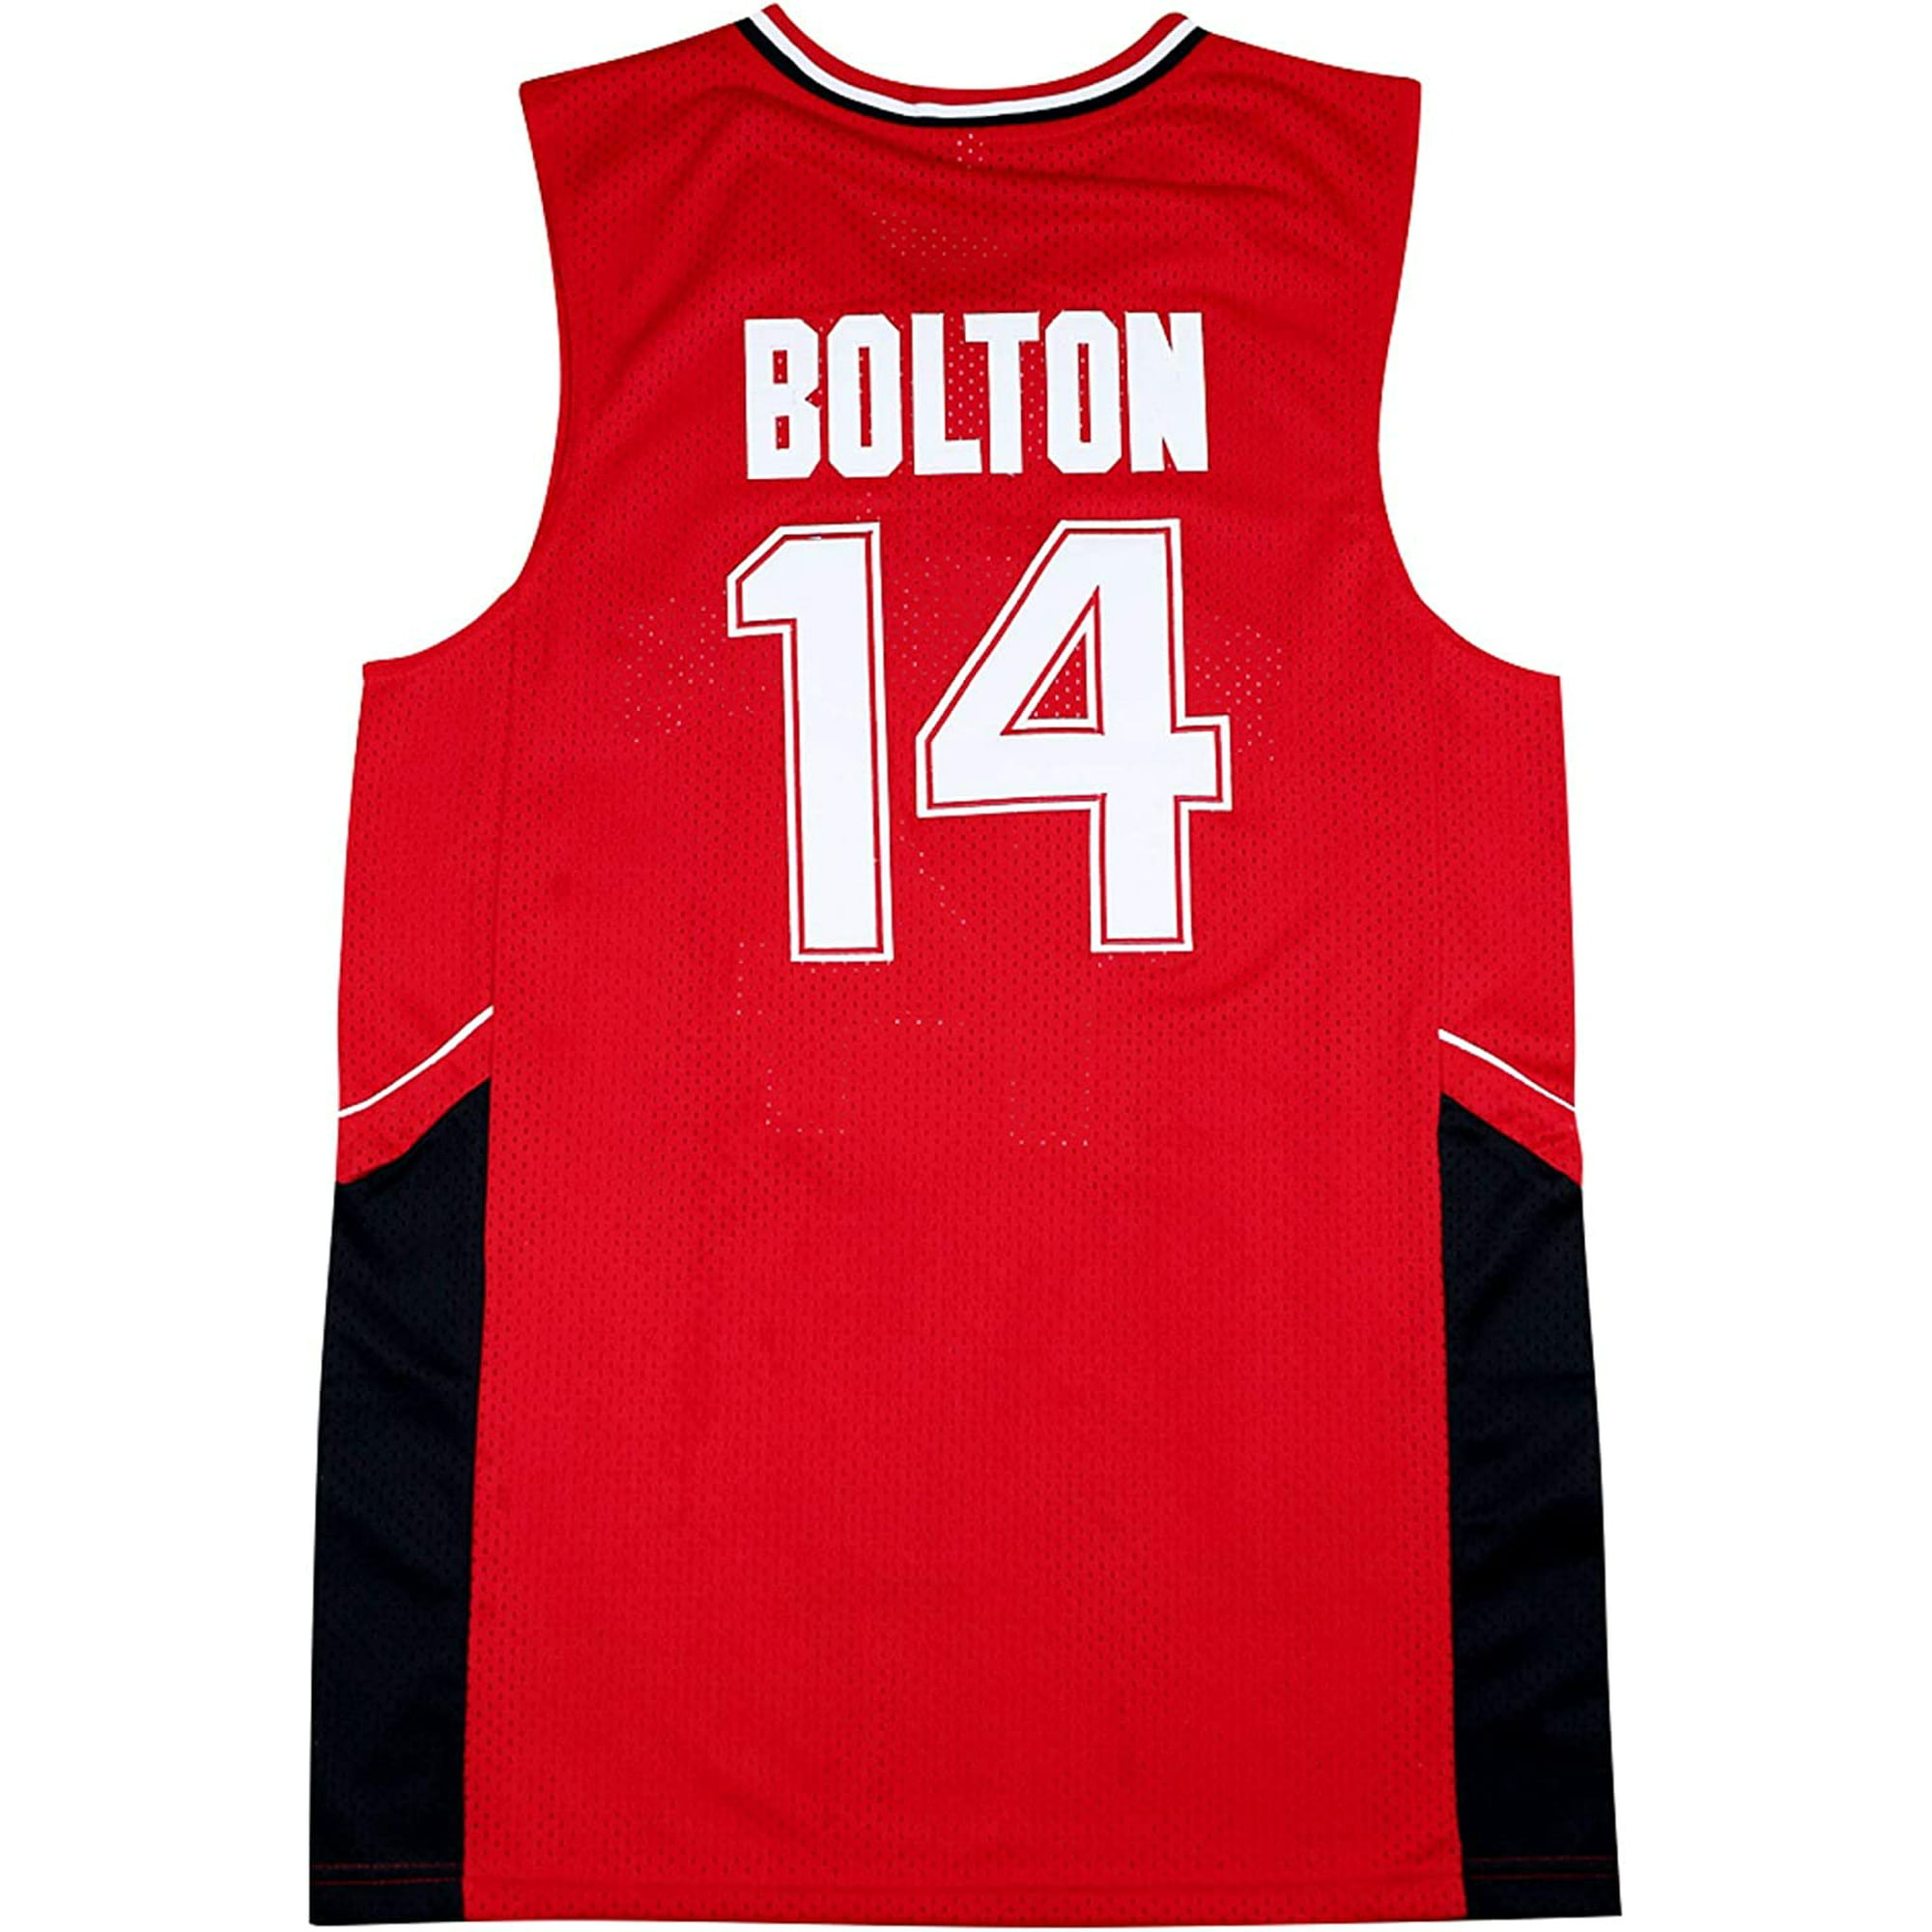 troy bolton basketball outfit